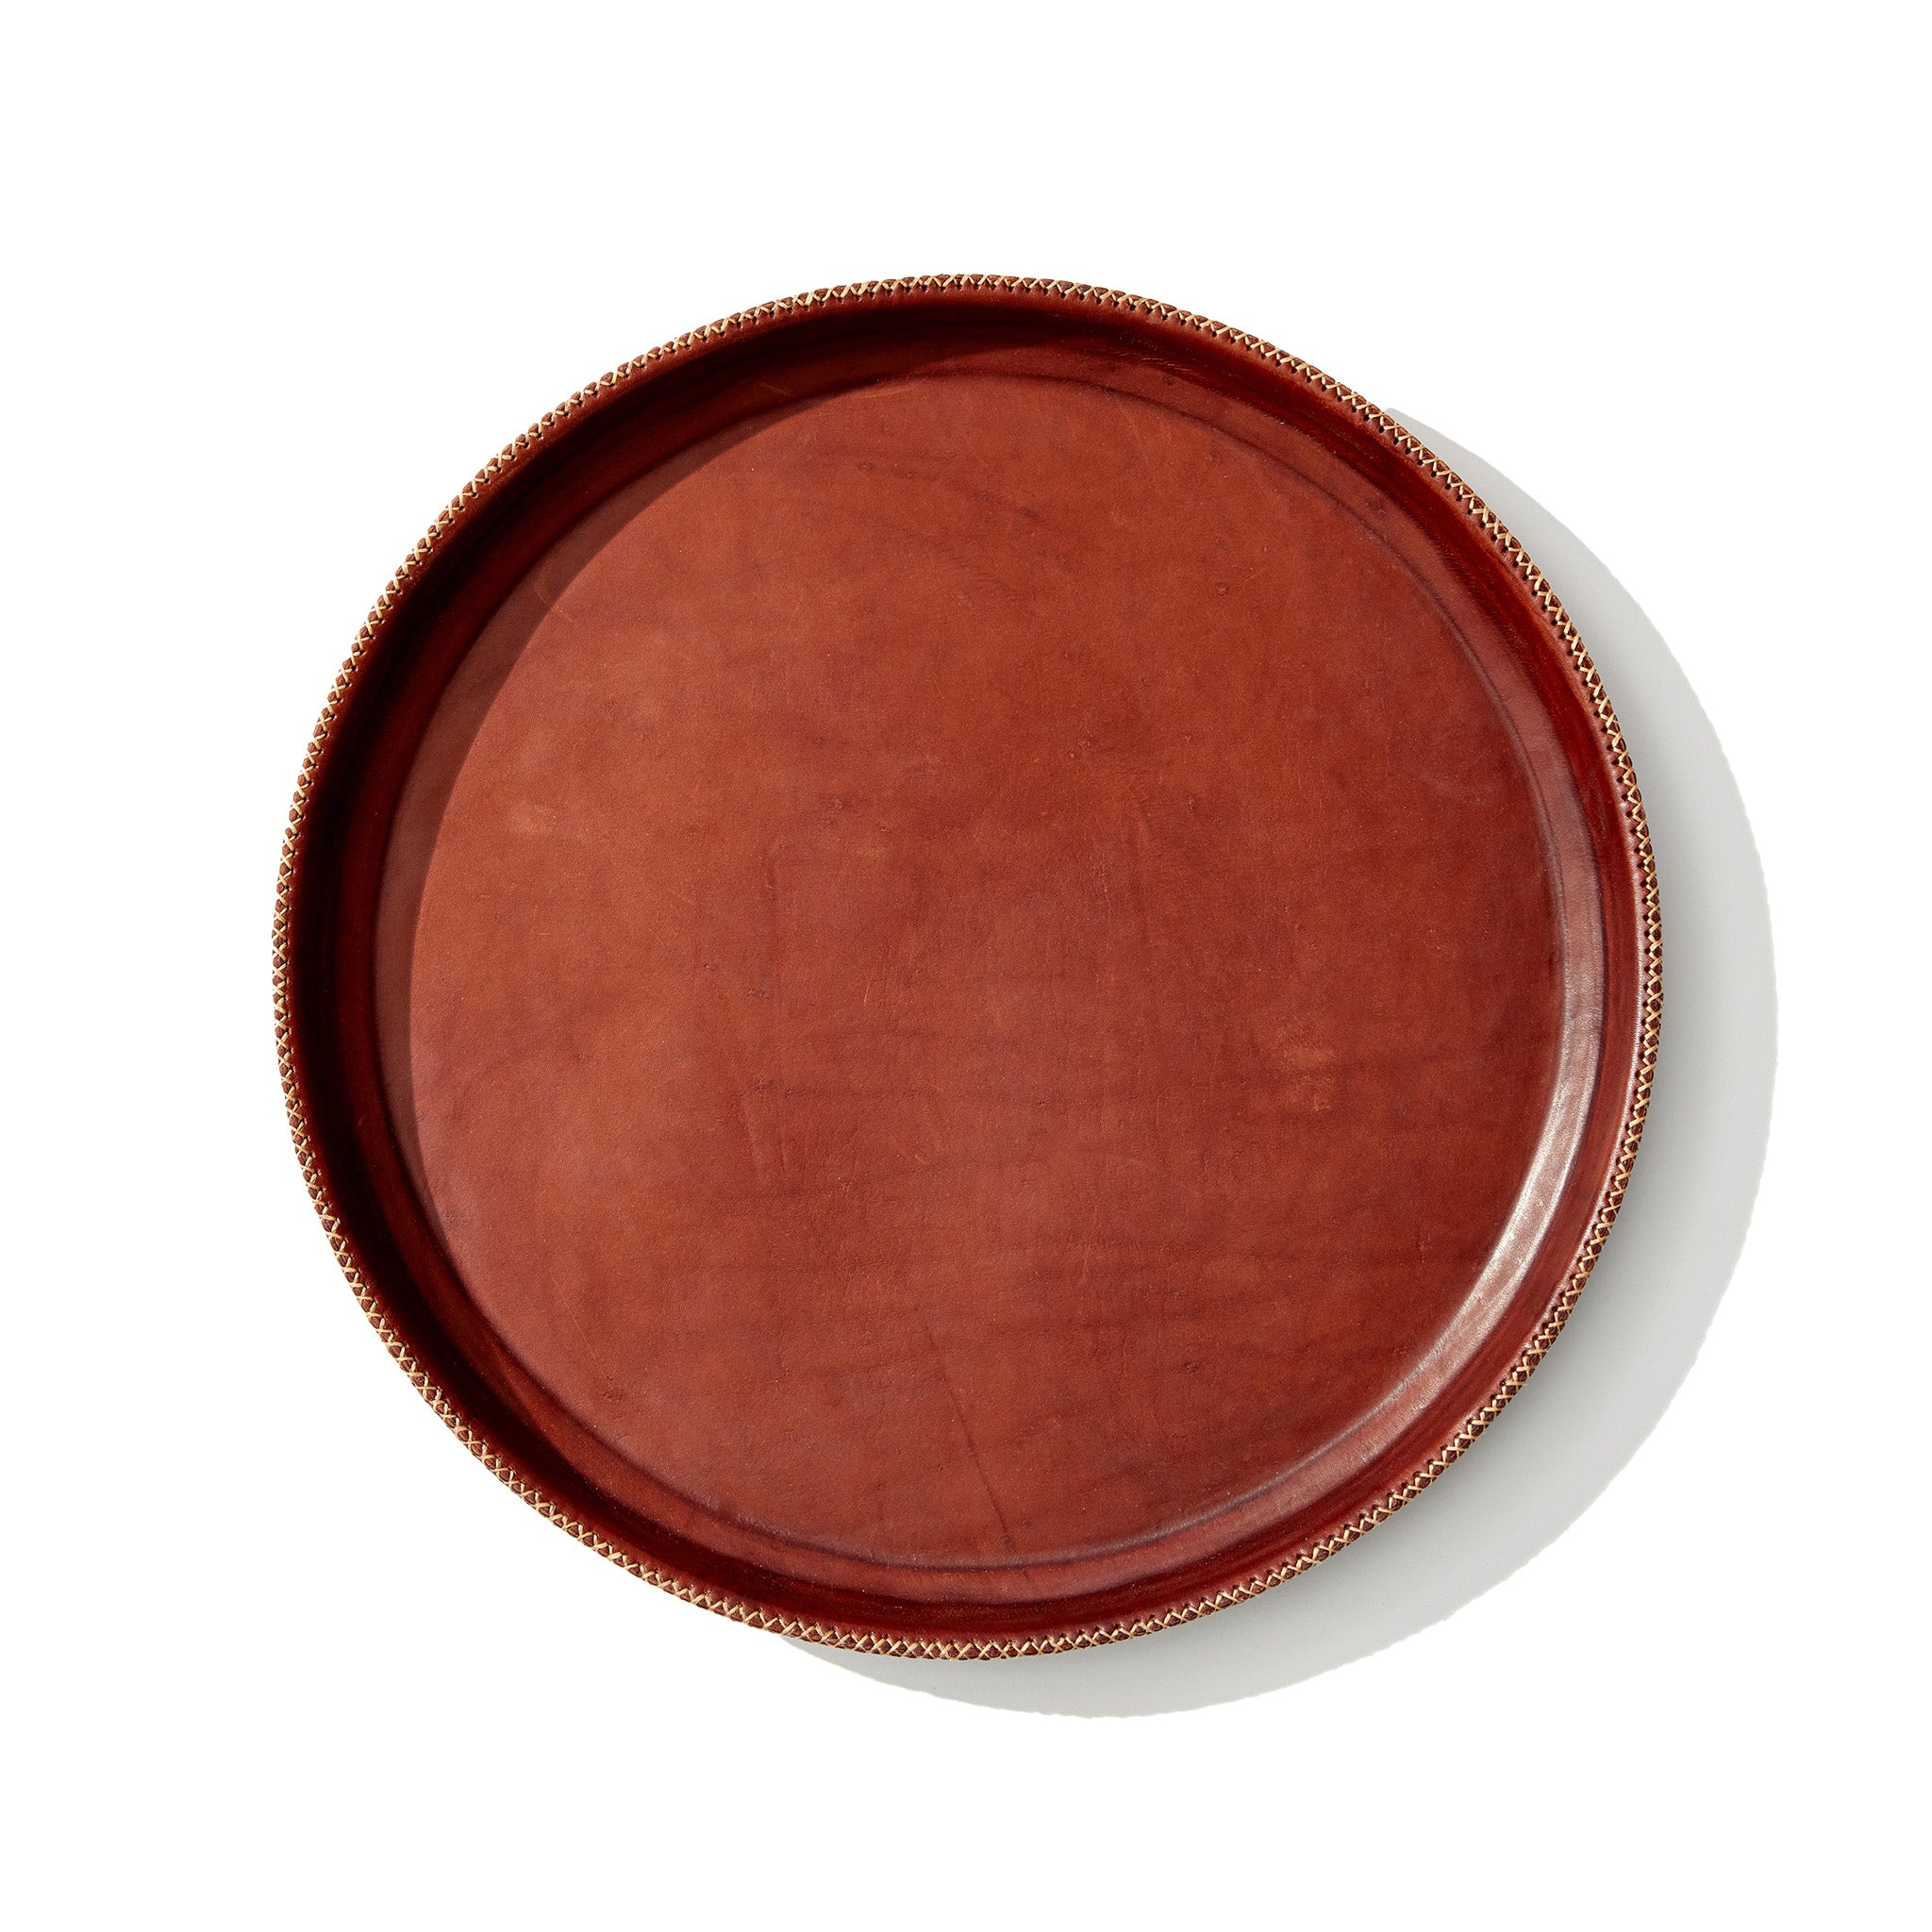 a brown leather serving tray on a white background